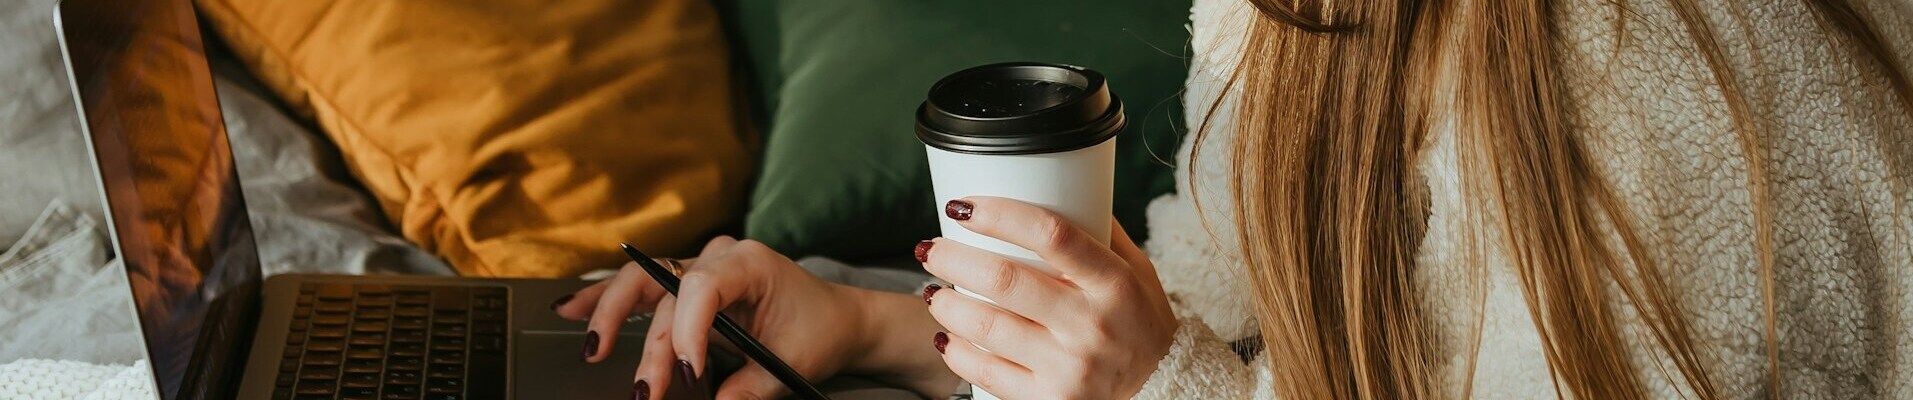 Close-up of a woman's hands with polished nails, holding a takeaway coffee cup and a pen over a laptop keyboard, indicating a comfortable remote work setting with warm tones.